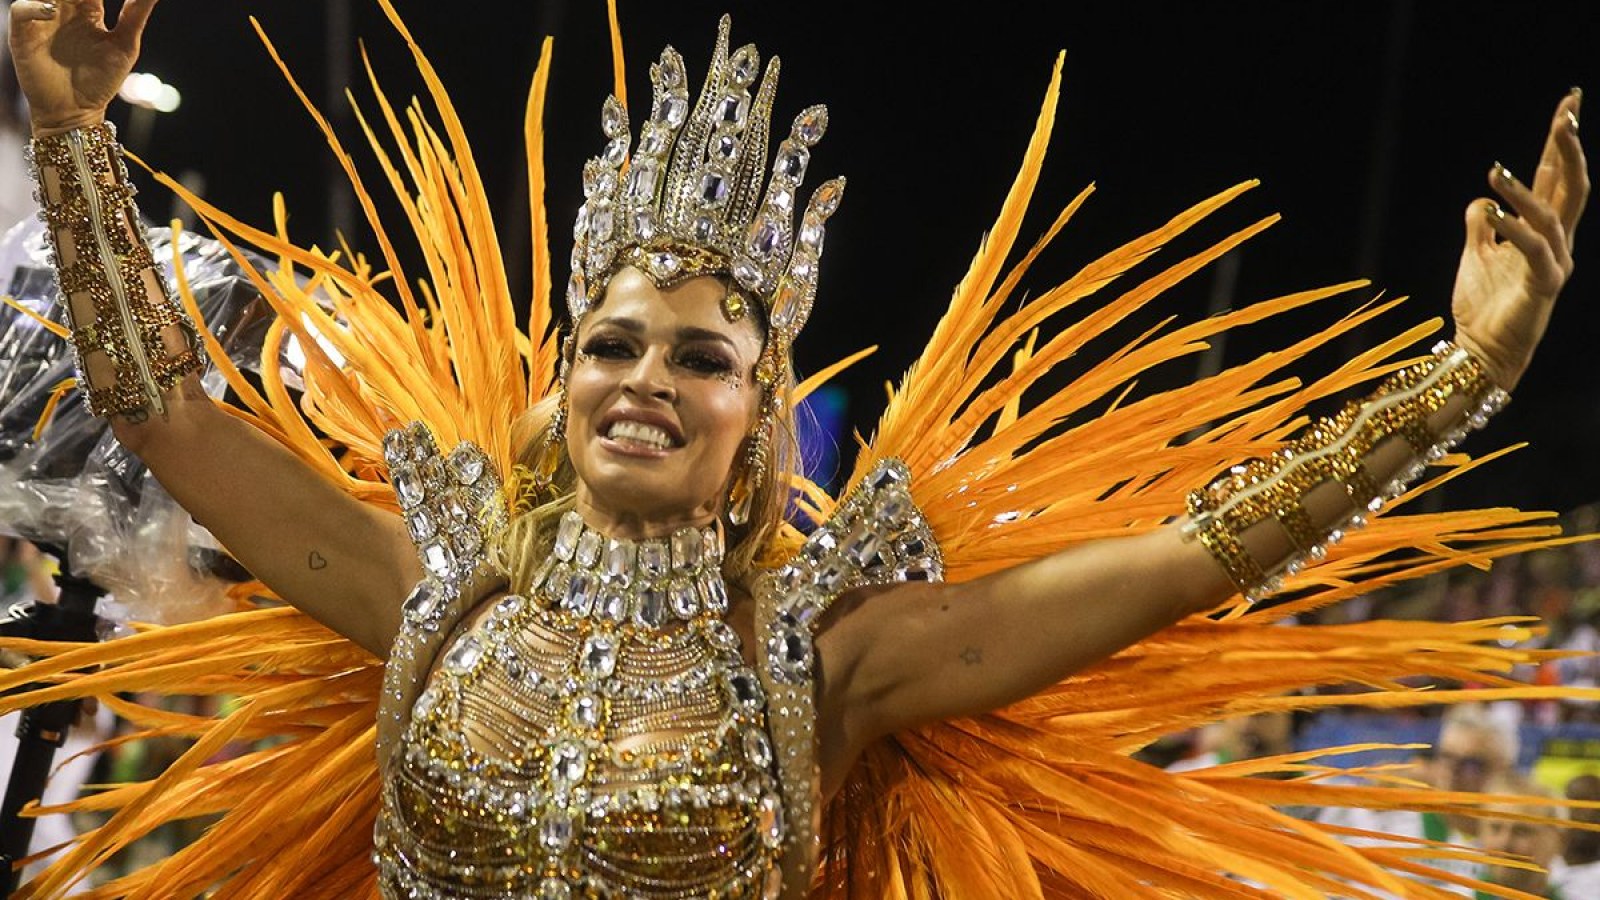 Rio de Janeiro Carnival 2019 Parades Part 1: The Spectacular Floats, Dancers, and Costumes, in Picture